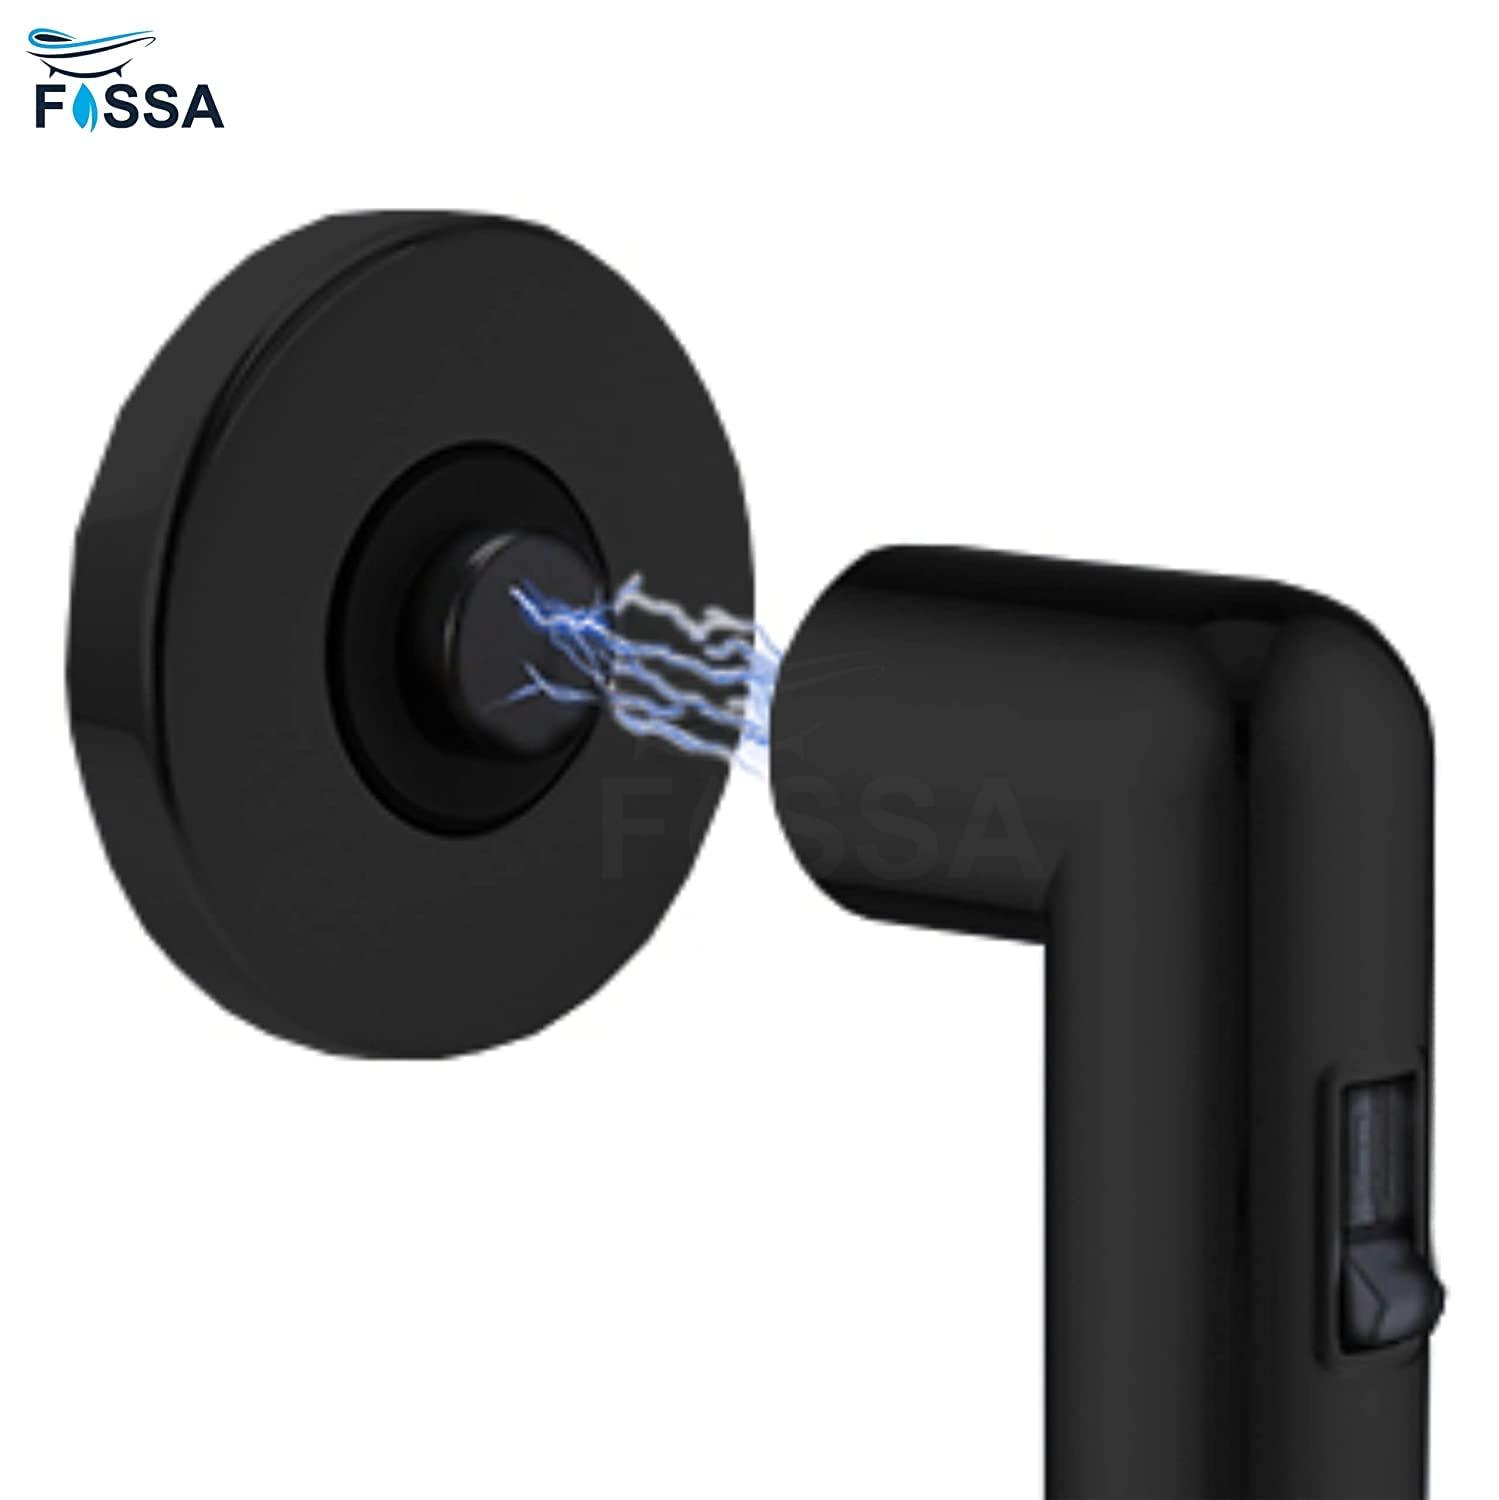 Fossa Magnetic Health Faucet with Magnetic Holder/Bidet Sprayer for Toilet and Bathroom/Jet Spray Black - Fossa Home 